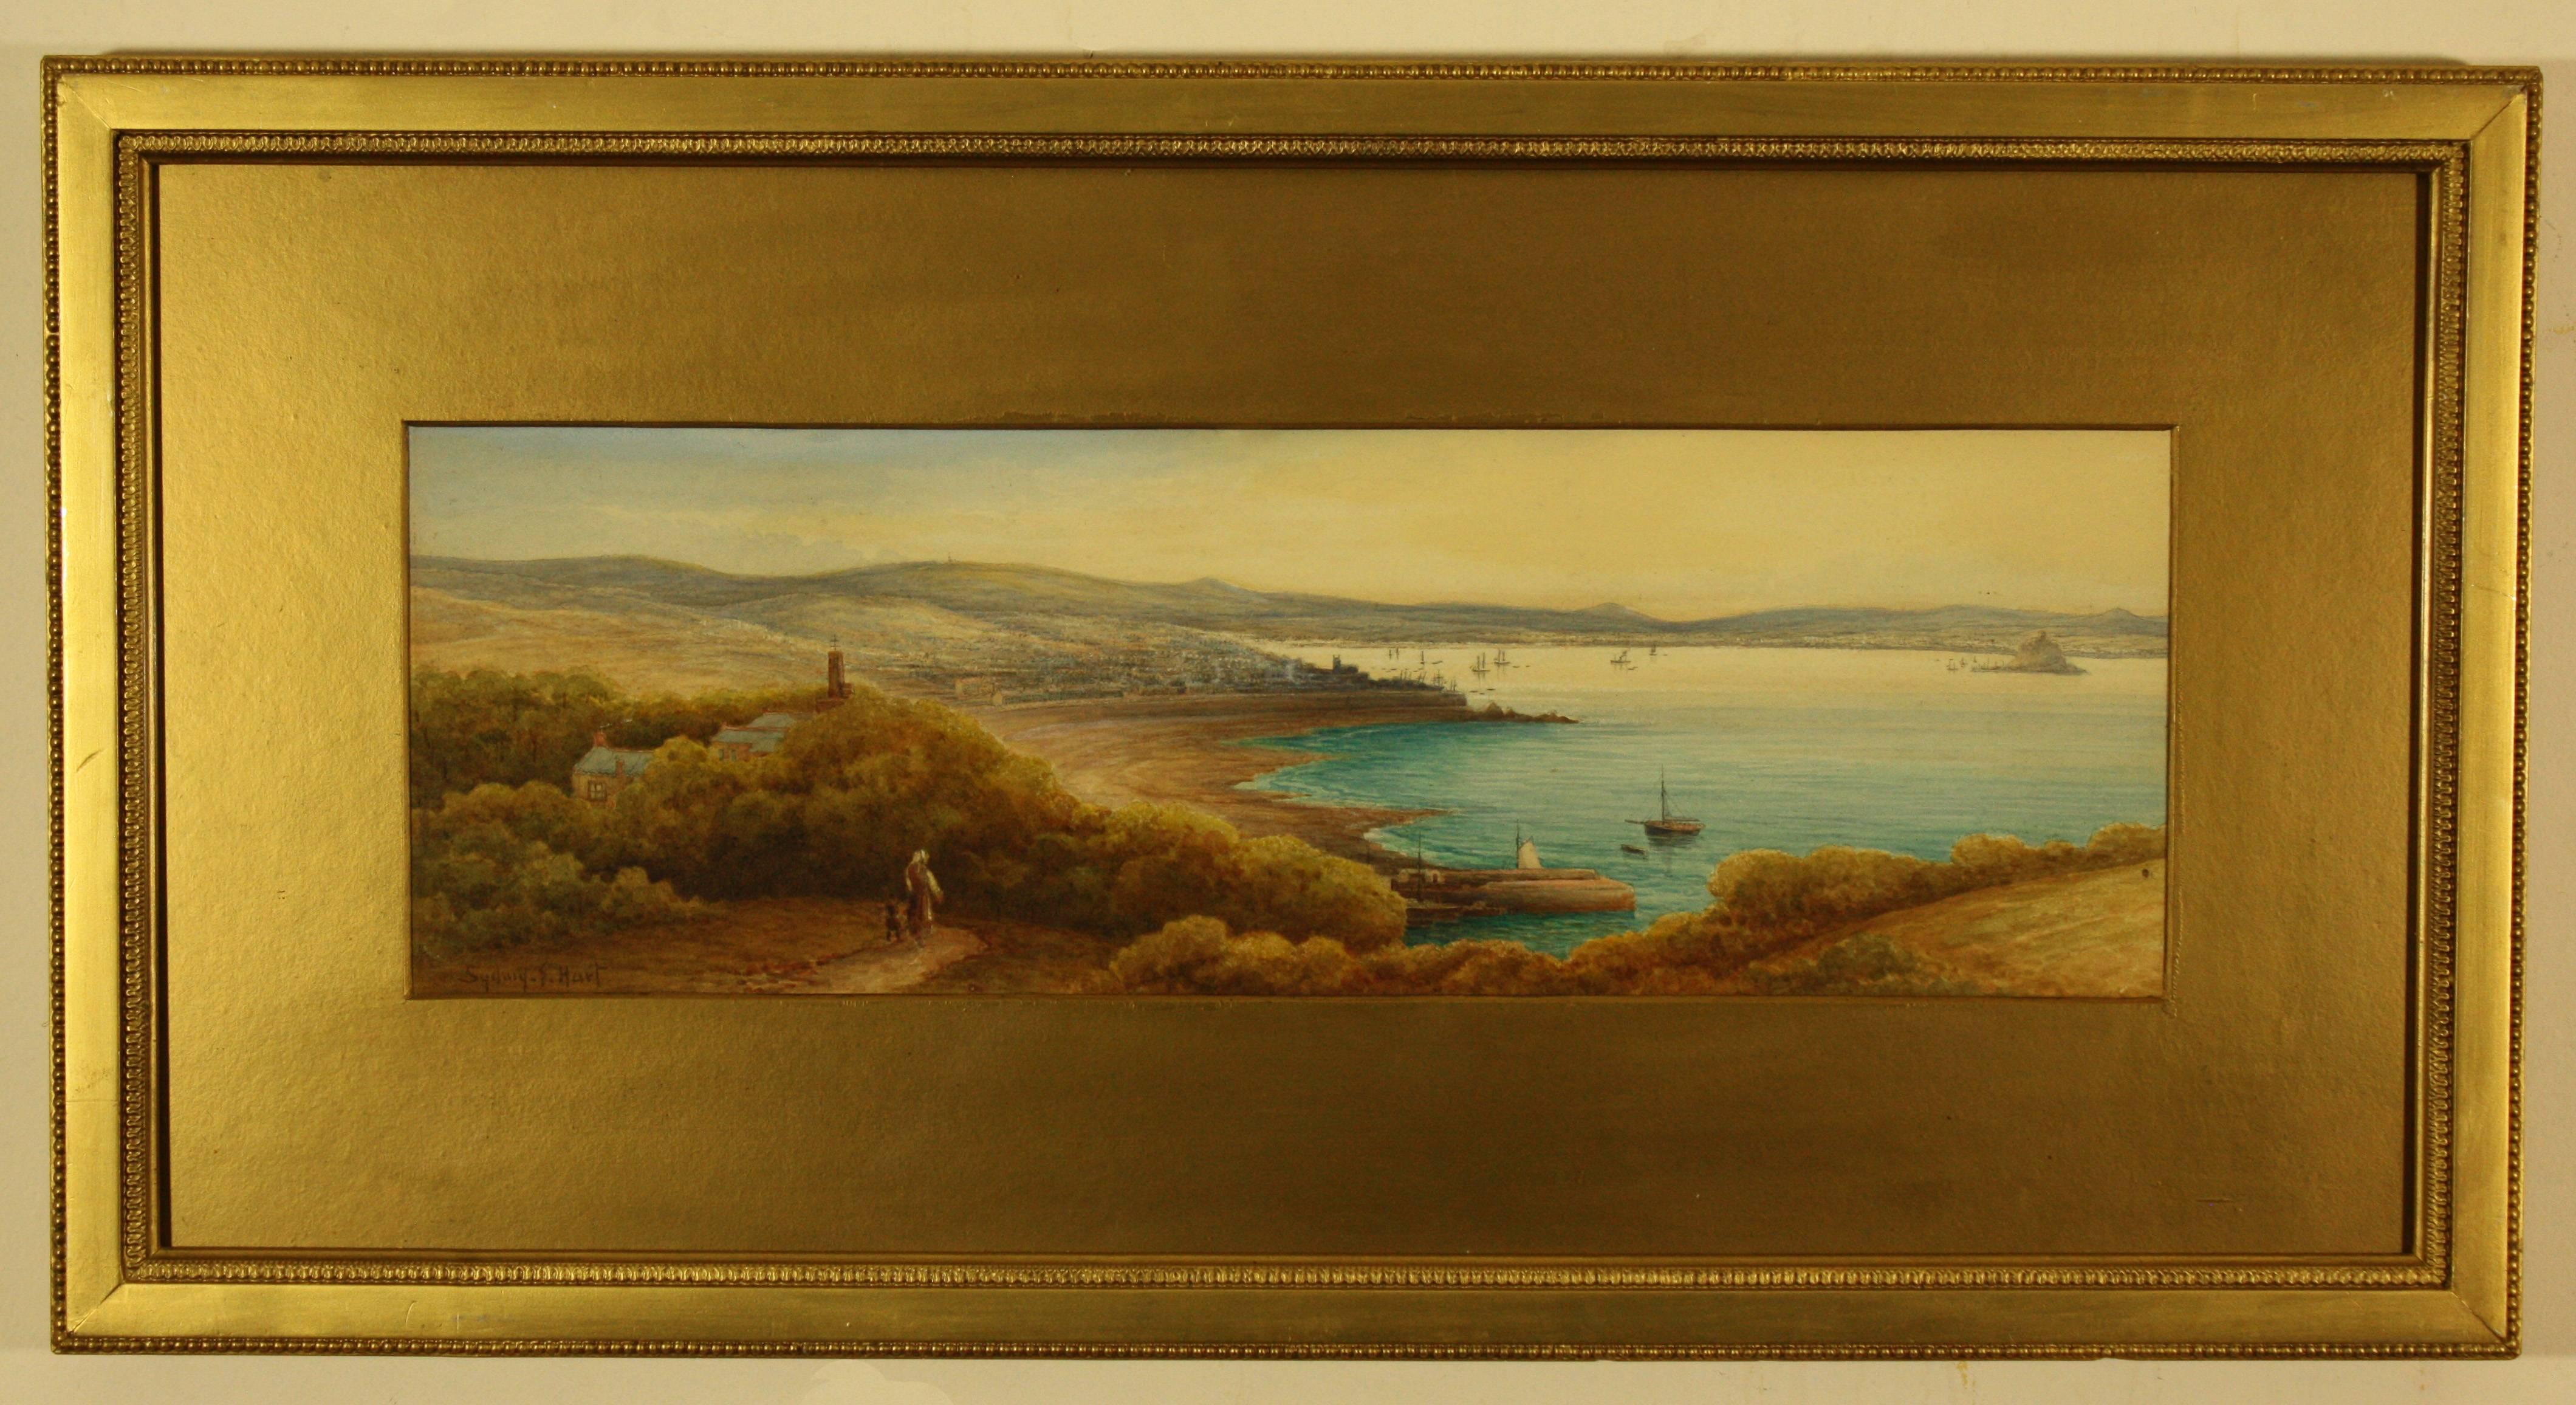 Penzance, Marazion and St Michael's Mount from Newlyn - Painting by Sydney Ernest Hart